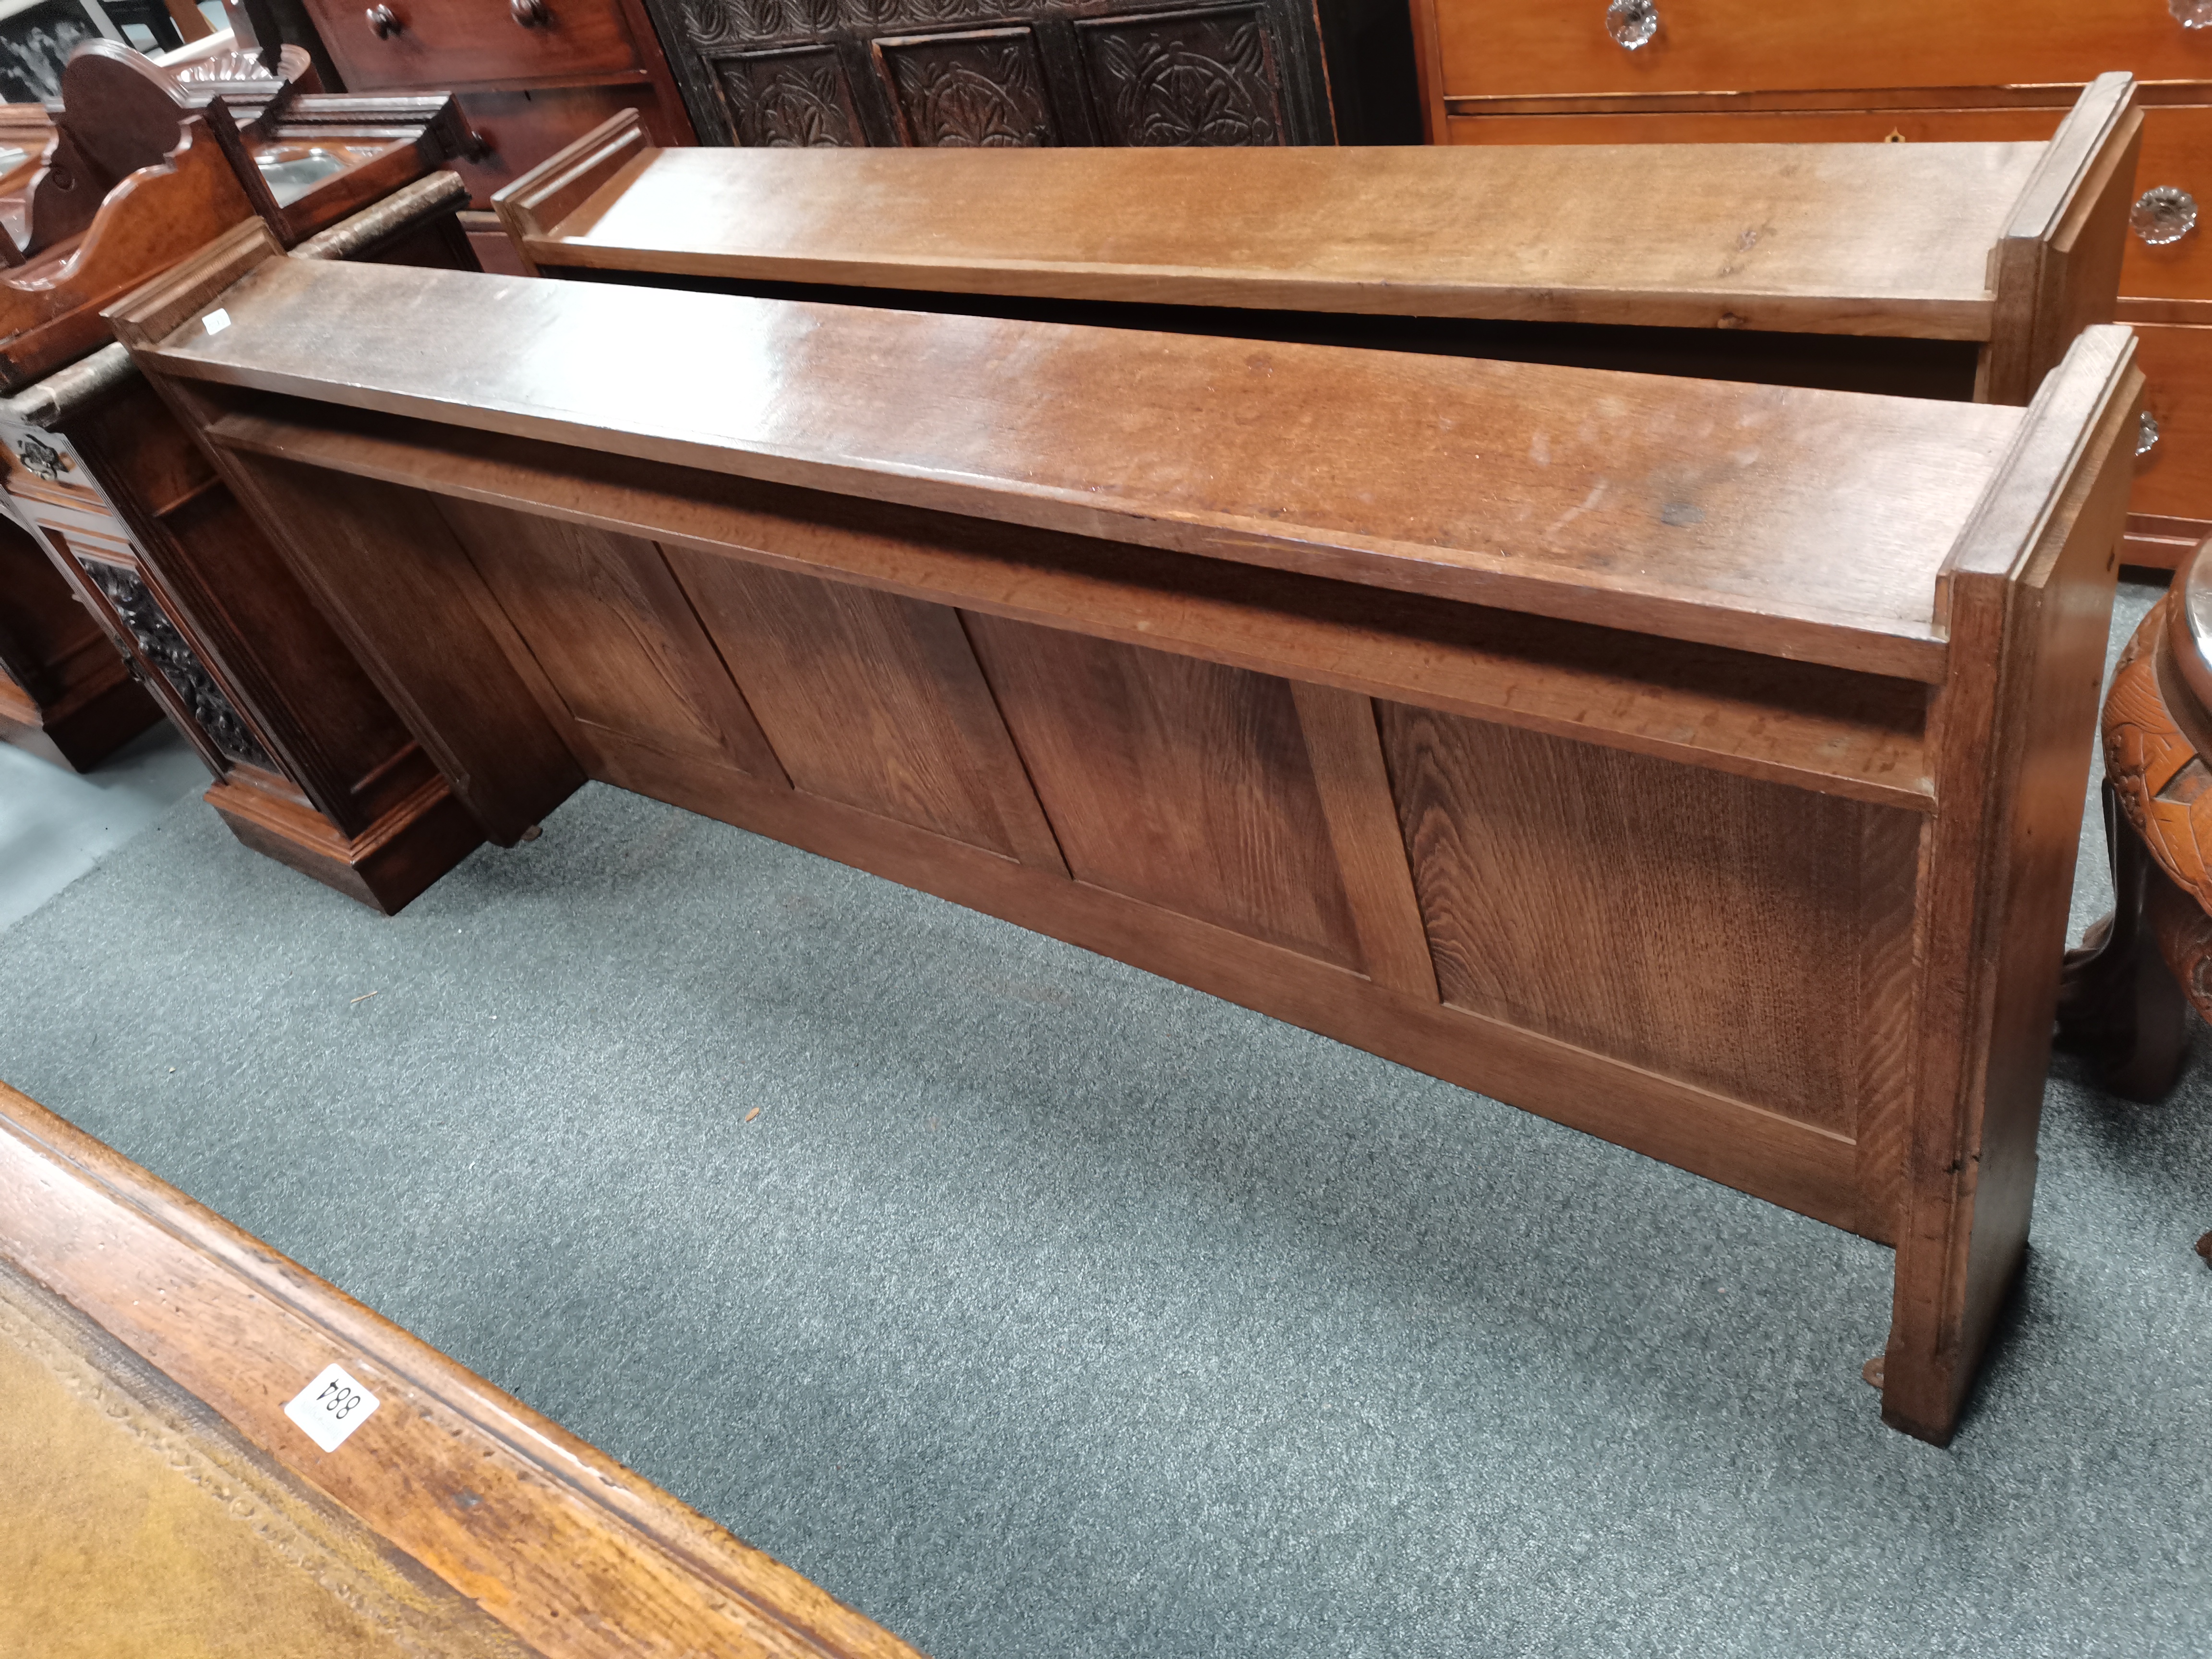 2 Mouseman church pew fronts 195cm and 150cm (good condition) - Image 2 of 7